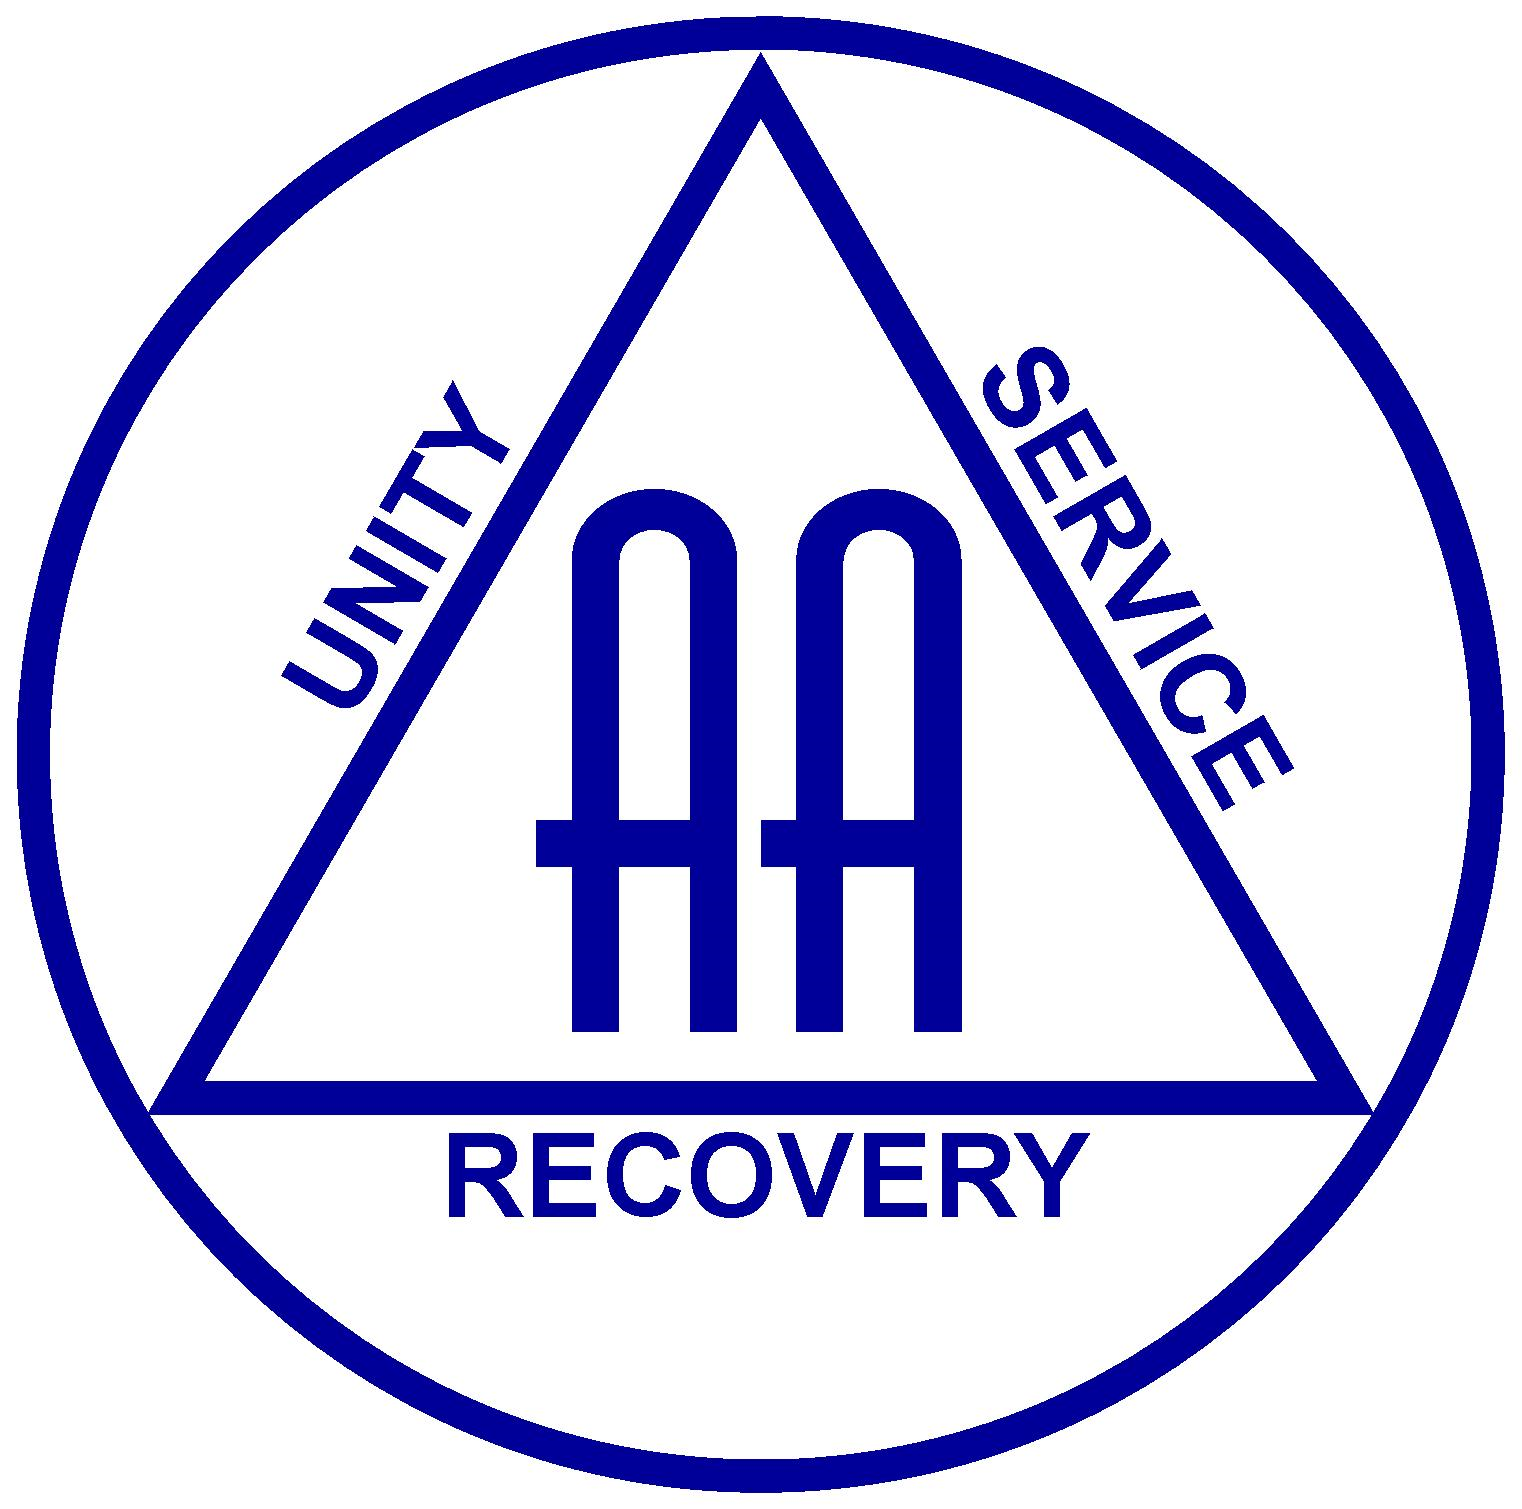 A.A. Preamble - Welcome to Alcoholics Anonymous in Placer County